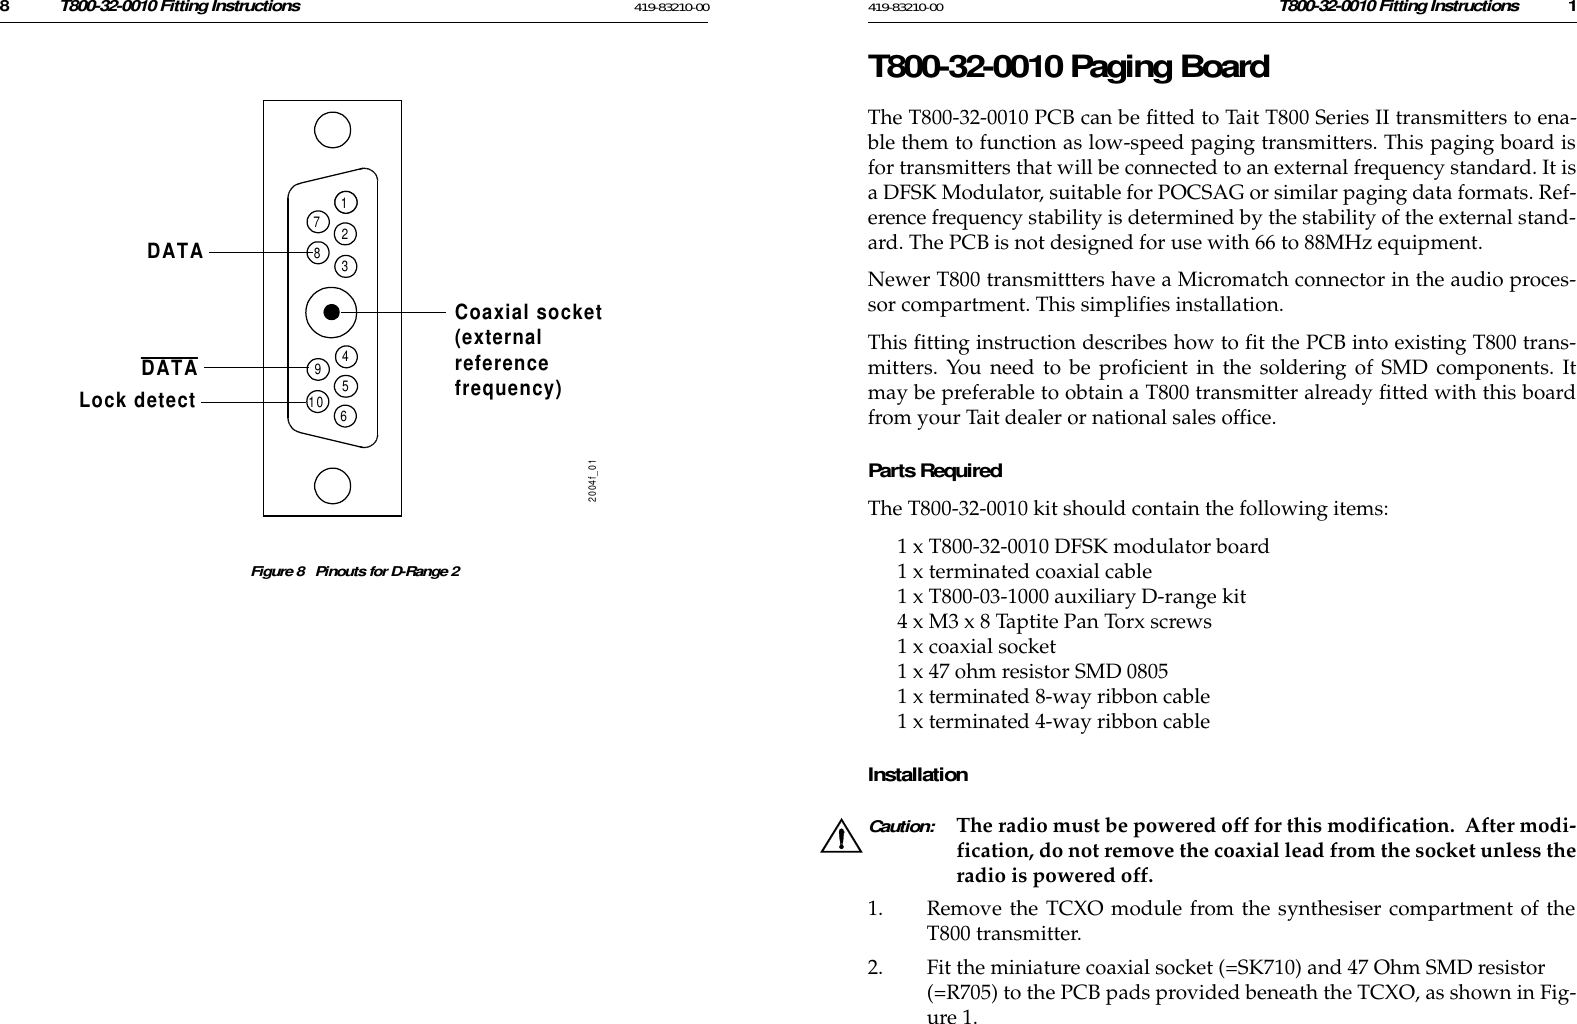 8T800-32-0010 Fitting Instructions 419-83210-00 419-83210-00 T800-32-0010 Fitting Instructions 1Figure 8   Pinouts for D-Range 212345689102004f_01DATADATALock detectCoaxial socket(externalreferencefrequency)7T800-32-0010 Paging BoardThe T800-32-0010 PCB can be fitted to Tait T800 Series II transmitters to ena-ble them to function as low-speed paging transmitters. This paging board isfor transmitters that will be connected to an external frequency standard. It isa DFSK Modulator, suitable for POCSAG or similar paging data formats. Ref-erence frequency stability is determined by the stability of the external stand-ard. The PCB is not designed for use with 66 to 88MHz equipment. Newer T800 transmittters have a Micromatch connector in the audio proces-sor compartment. This simplifies installation. This fitting instruction describes how to fit the PCB into existing T800 trans-mitters. You need to be proficient in the soldering of SMD components. Itmay be preferable to obtain a T800 transmitter already fitted with this boardfrom your Tait dealer or national sales office. Parts RequiredThe T800-32-0010 kit should contain the following items:1 x T800-32-0010 DFSK modulator board1 x terminated coaxial cable1 x T800-03-1000 auxiliary D-range kit4 x M3 x 8 Taptite Pan Torx screws1 x coaxial socket1 x 47 ohm resistor SMD 08051 x terminated 8-way ribbon cable1 x terminated 4-way ribbon cableInstallationCaution: The radio must be powered off for this modification.  After modi-fication, do not remove the coaxial lead from the socket unless theradio is powered off.1. Remove the TCXO module from the synthesiser compartment of theT800 transmitter.2. Fit the miniature coaxial socket (=SK710) and 47 Ohm SMD resistor (=R705) to the PCB pads provided beneath the TCXO, as shown in Fig-ure 1.